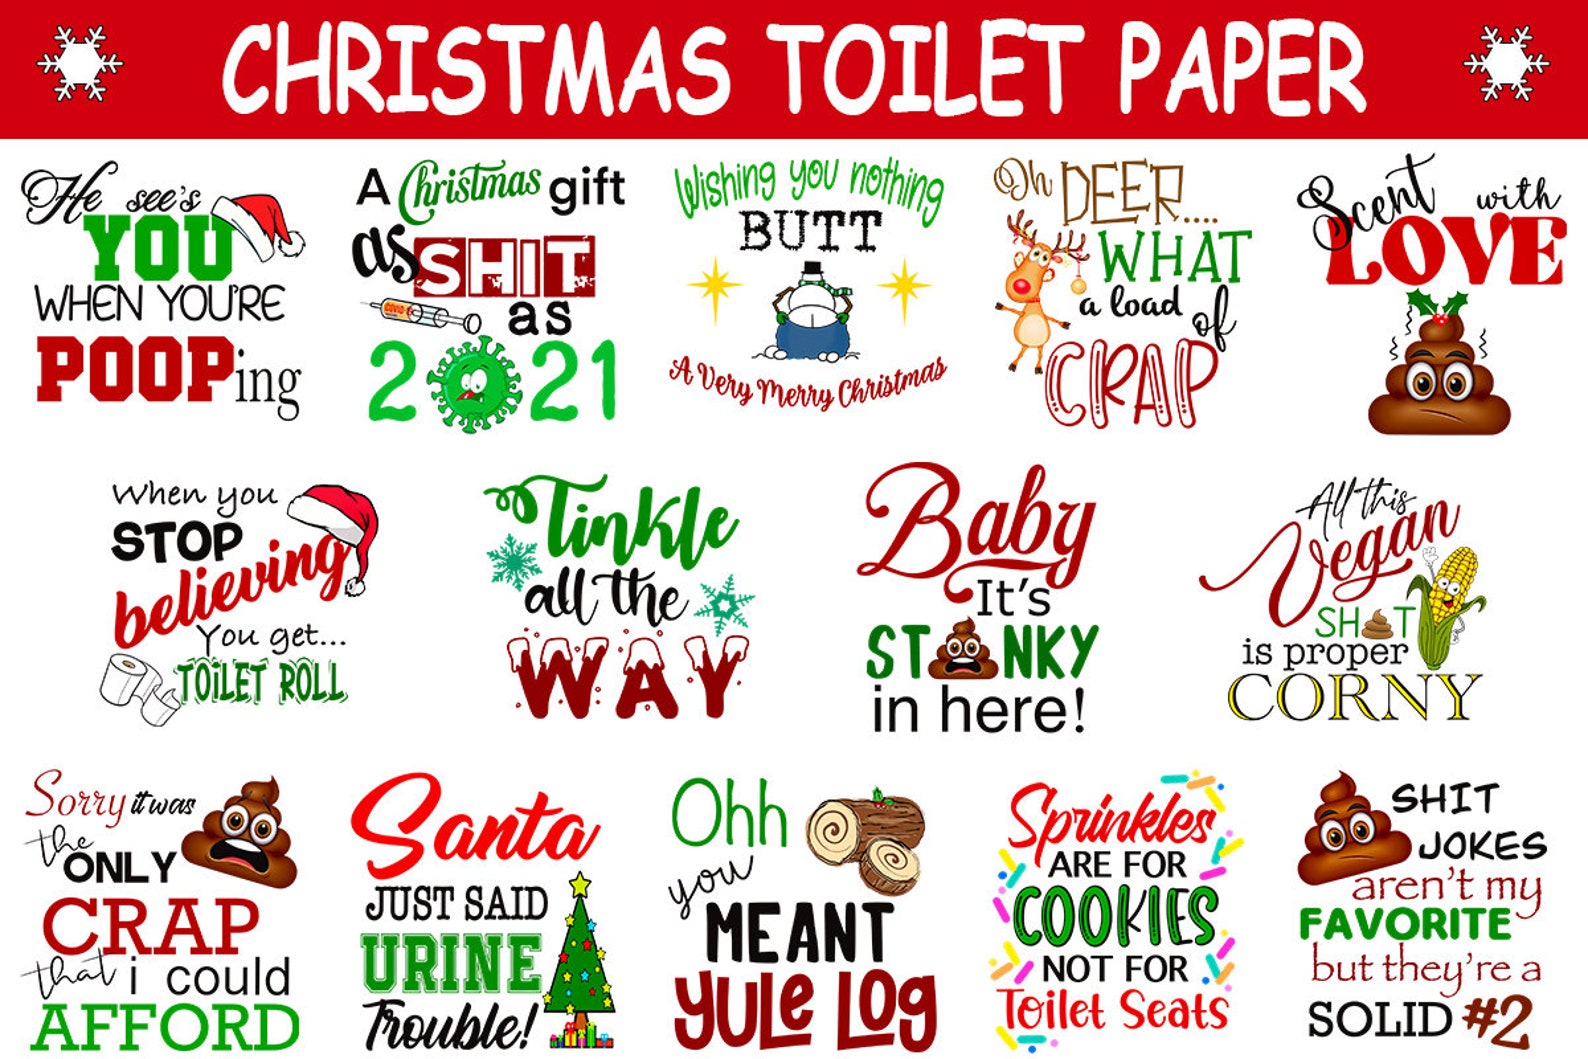 Diverse of Christmas toilet paper.